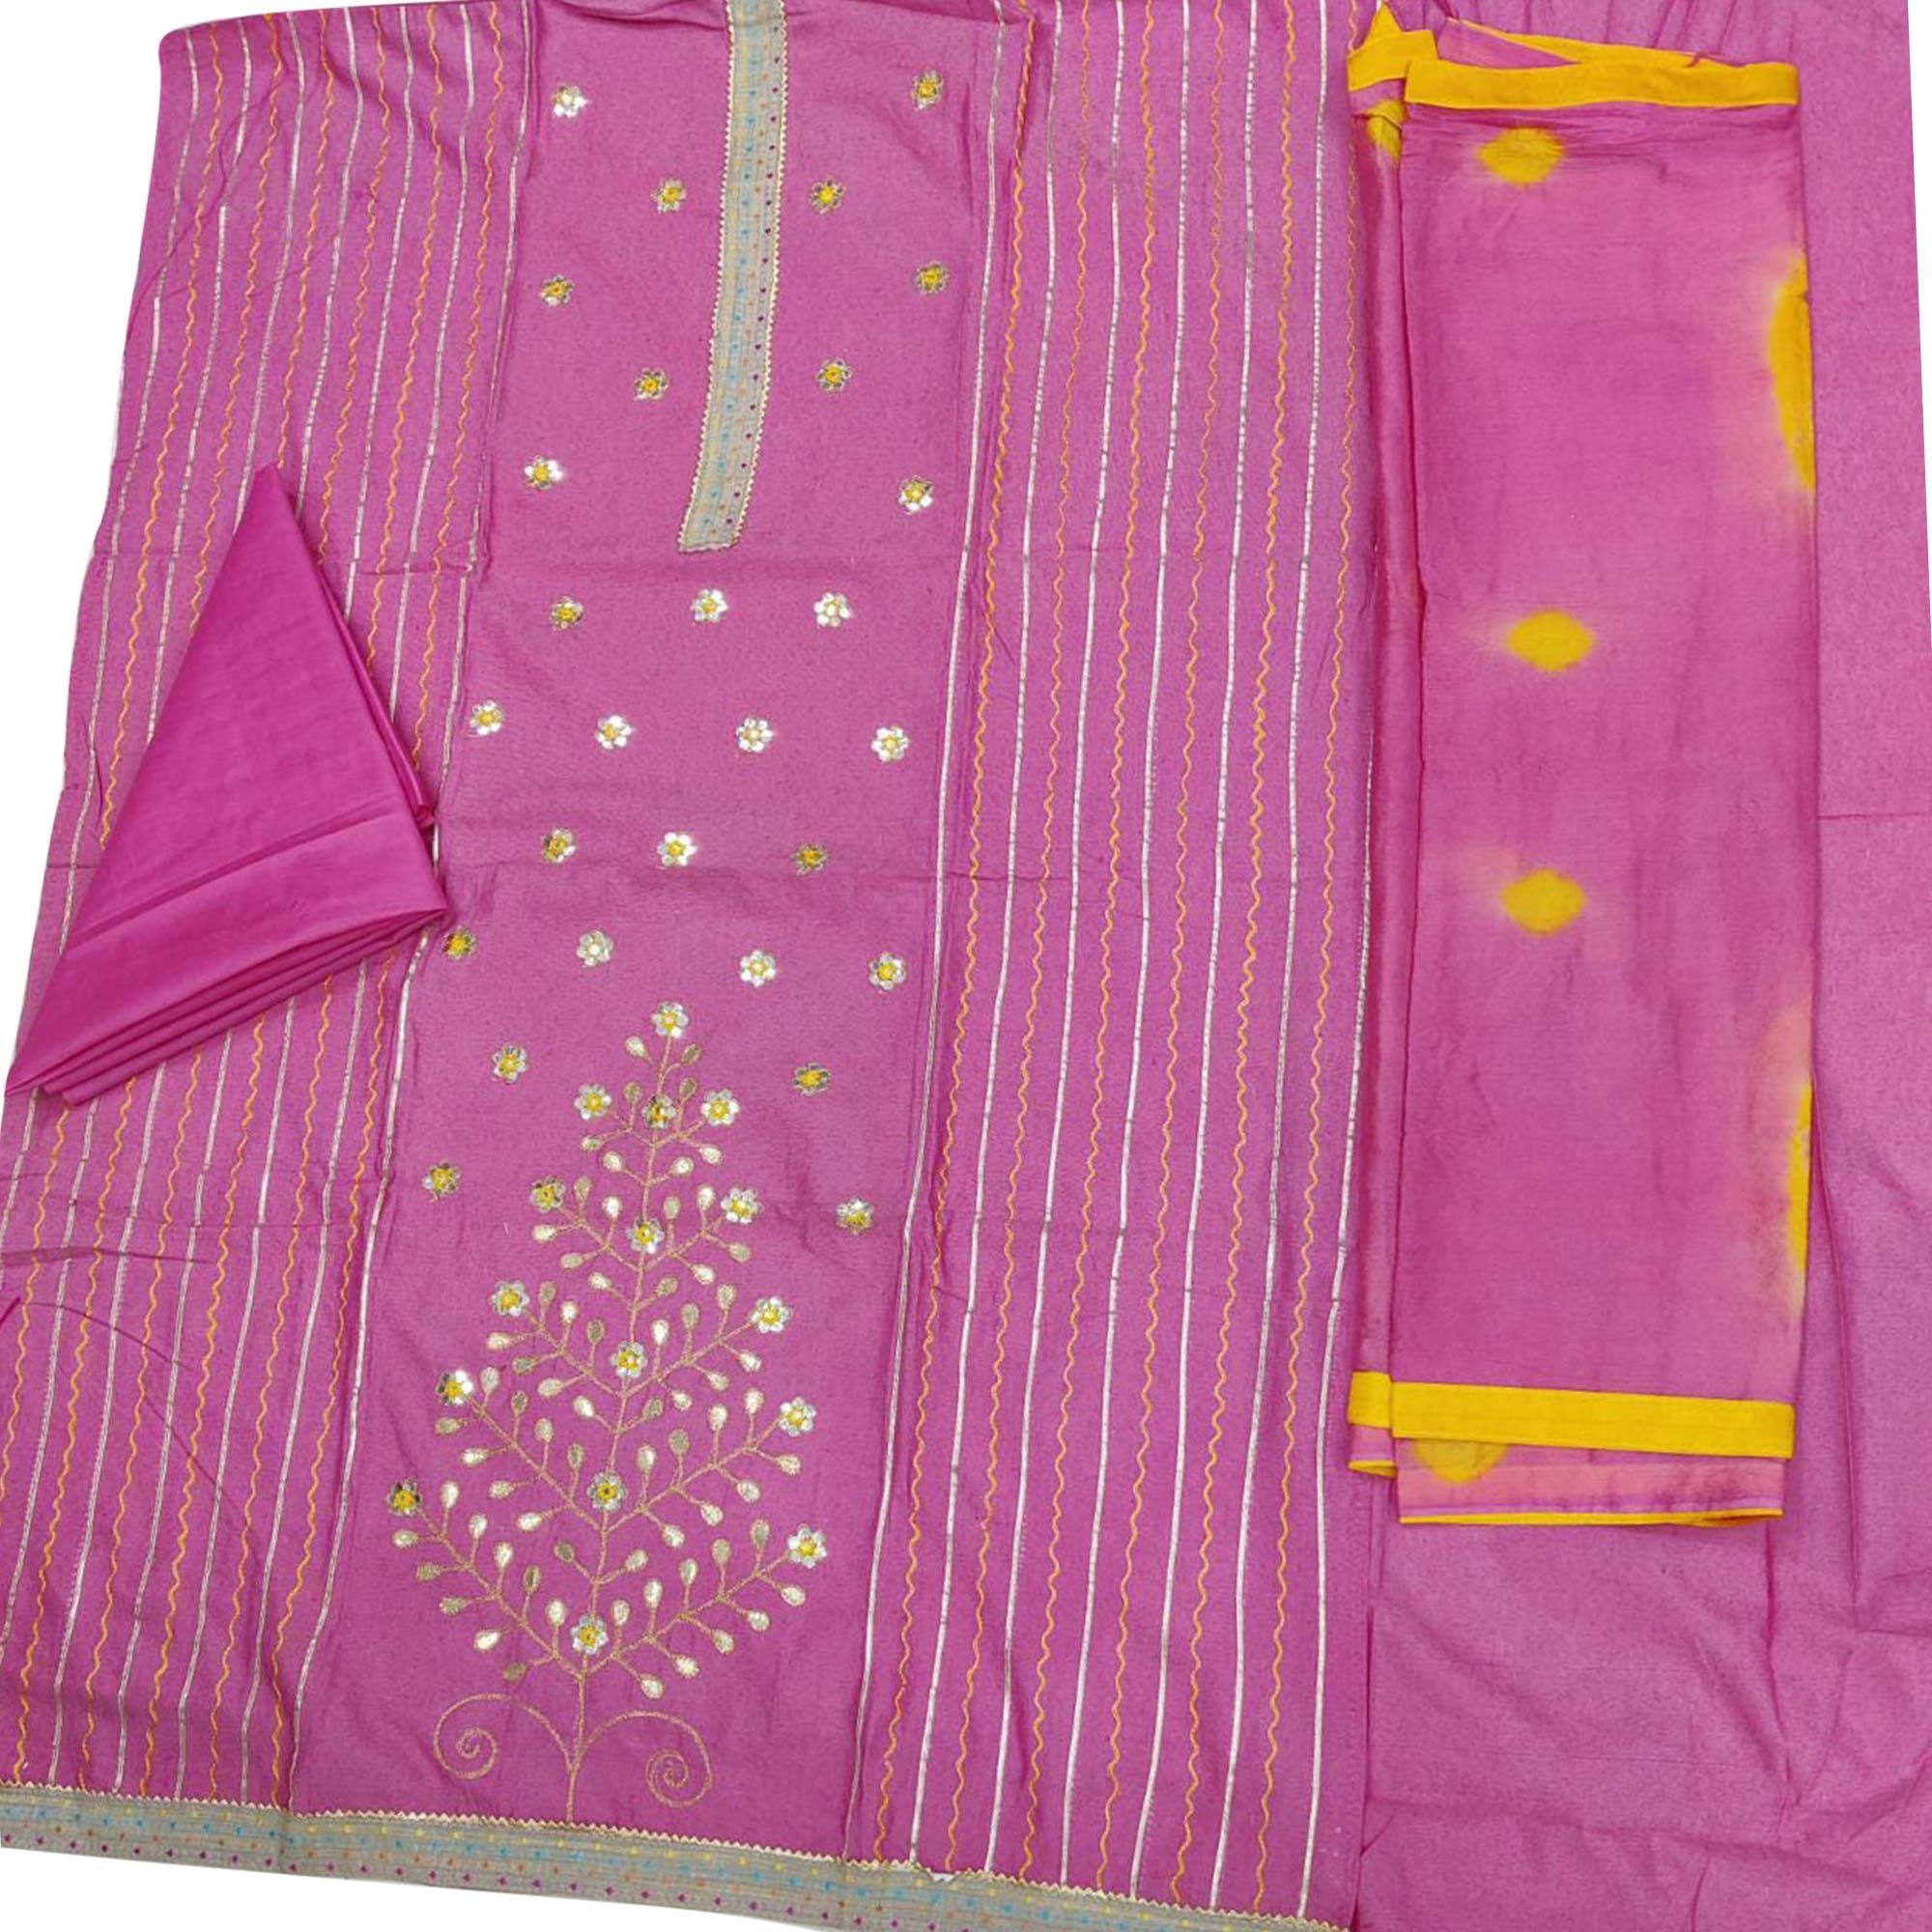 Sensational Pink Colored Festive Wear Embroidered Handloom Cotton Dress Material - Peachmode